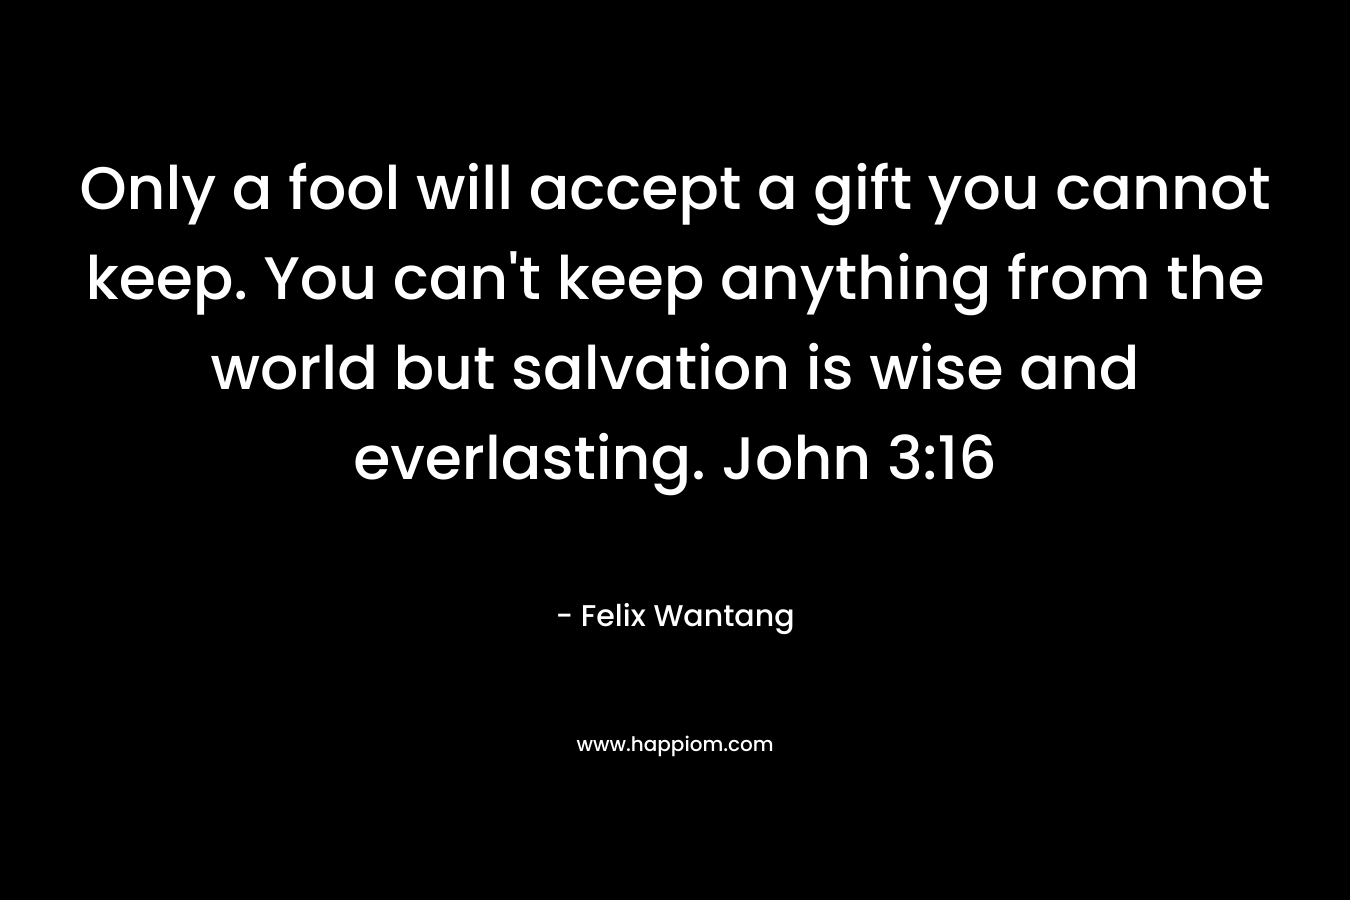 Only a fool will accept a gift you cannot keep. You can't keep anything from the world but salvation is wise and everlasting. John 3:16